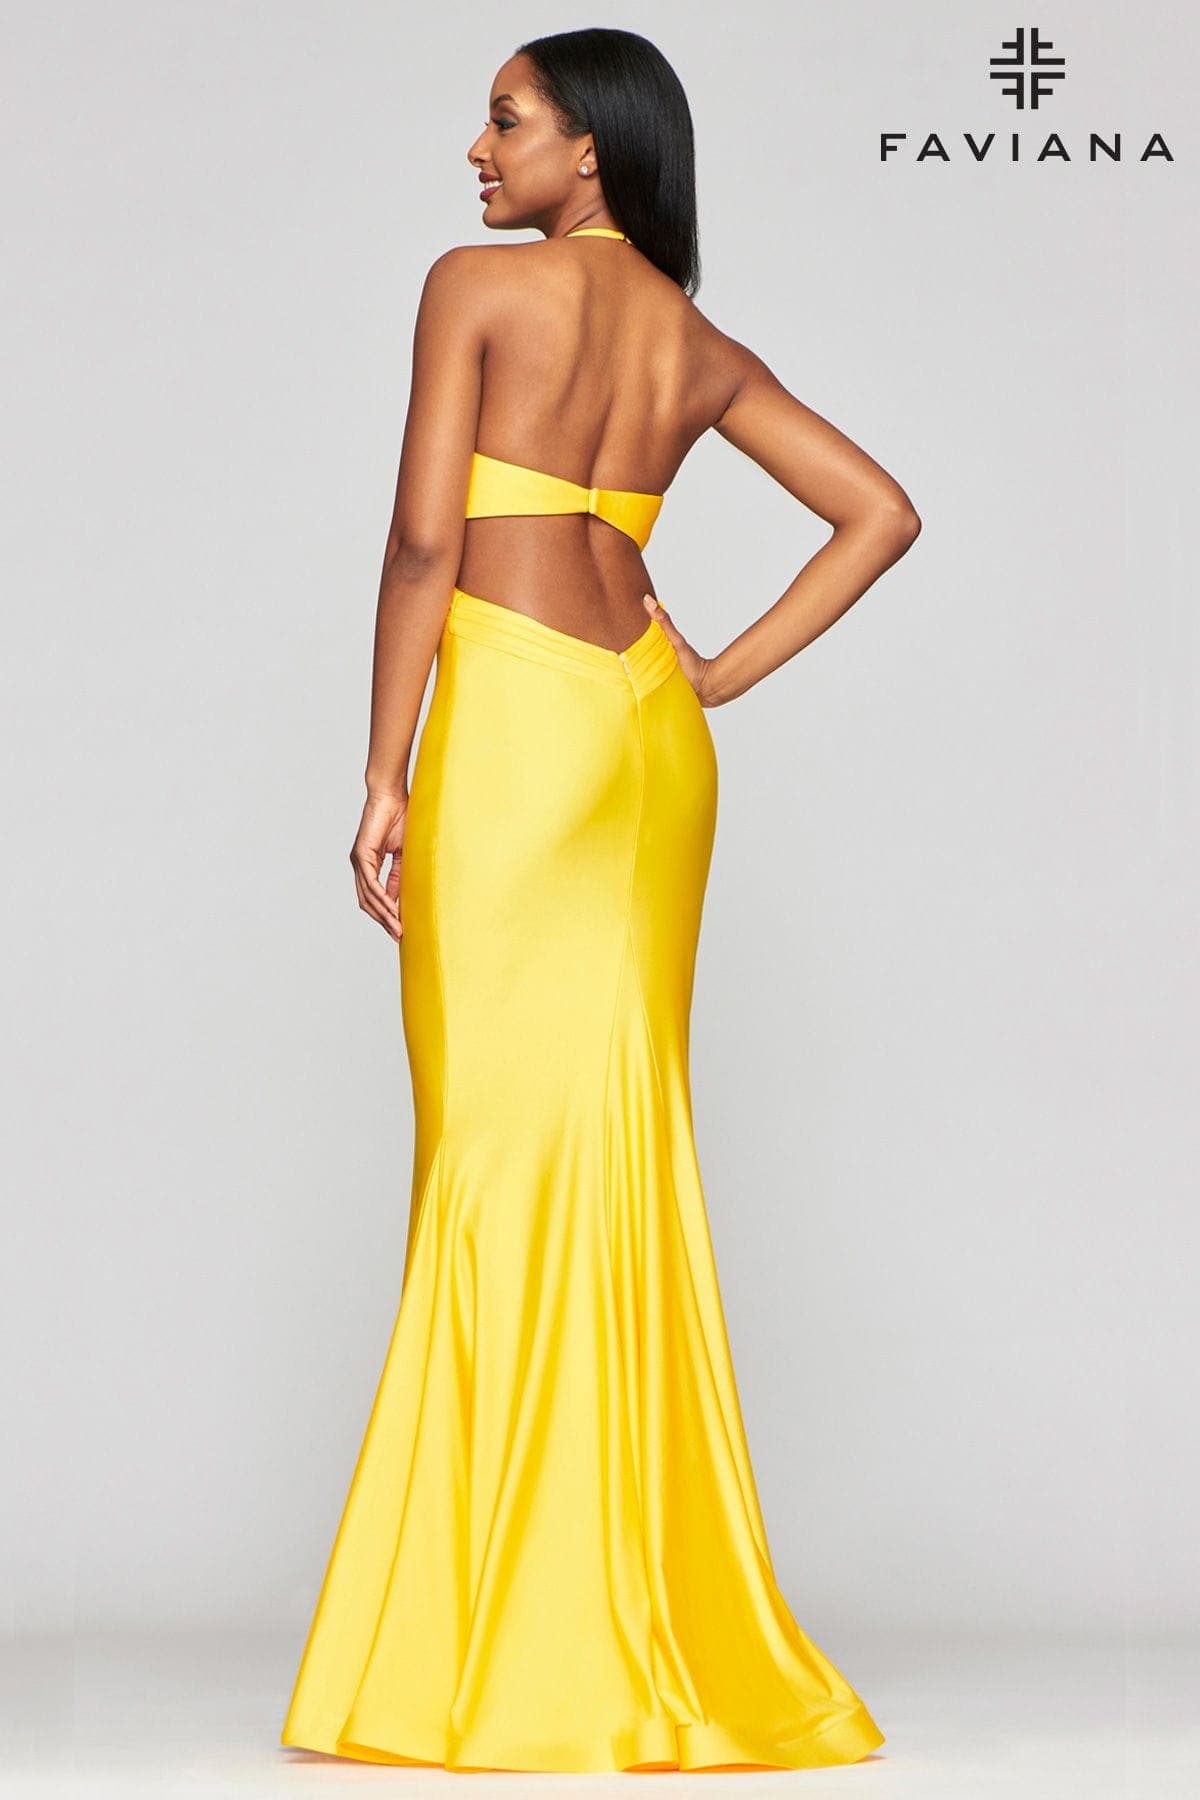 Long Tight Prom Dress WIth Side Cutouts